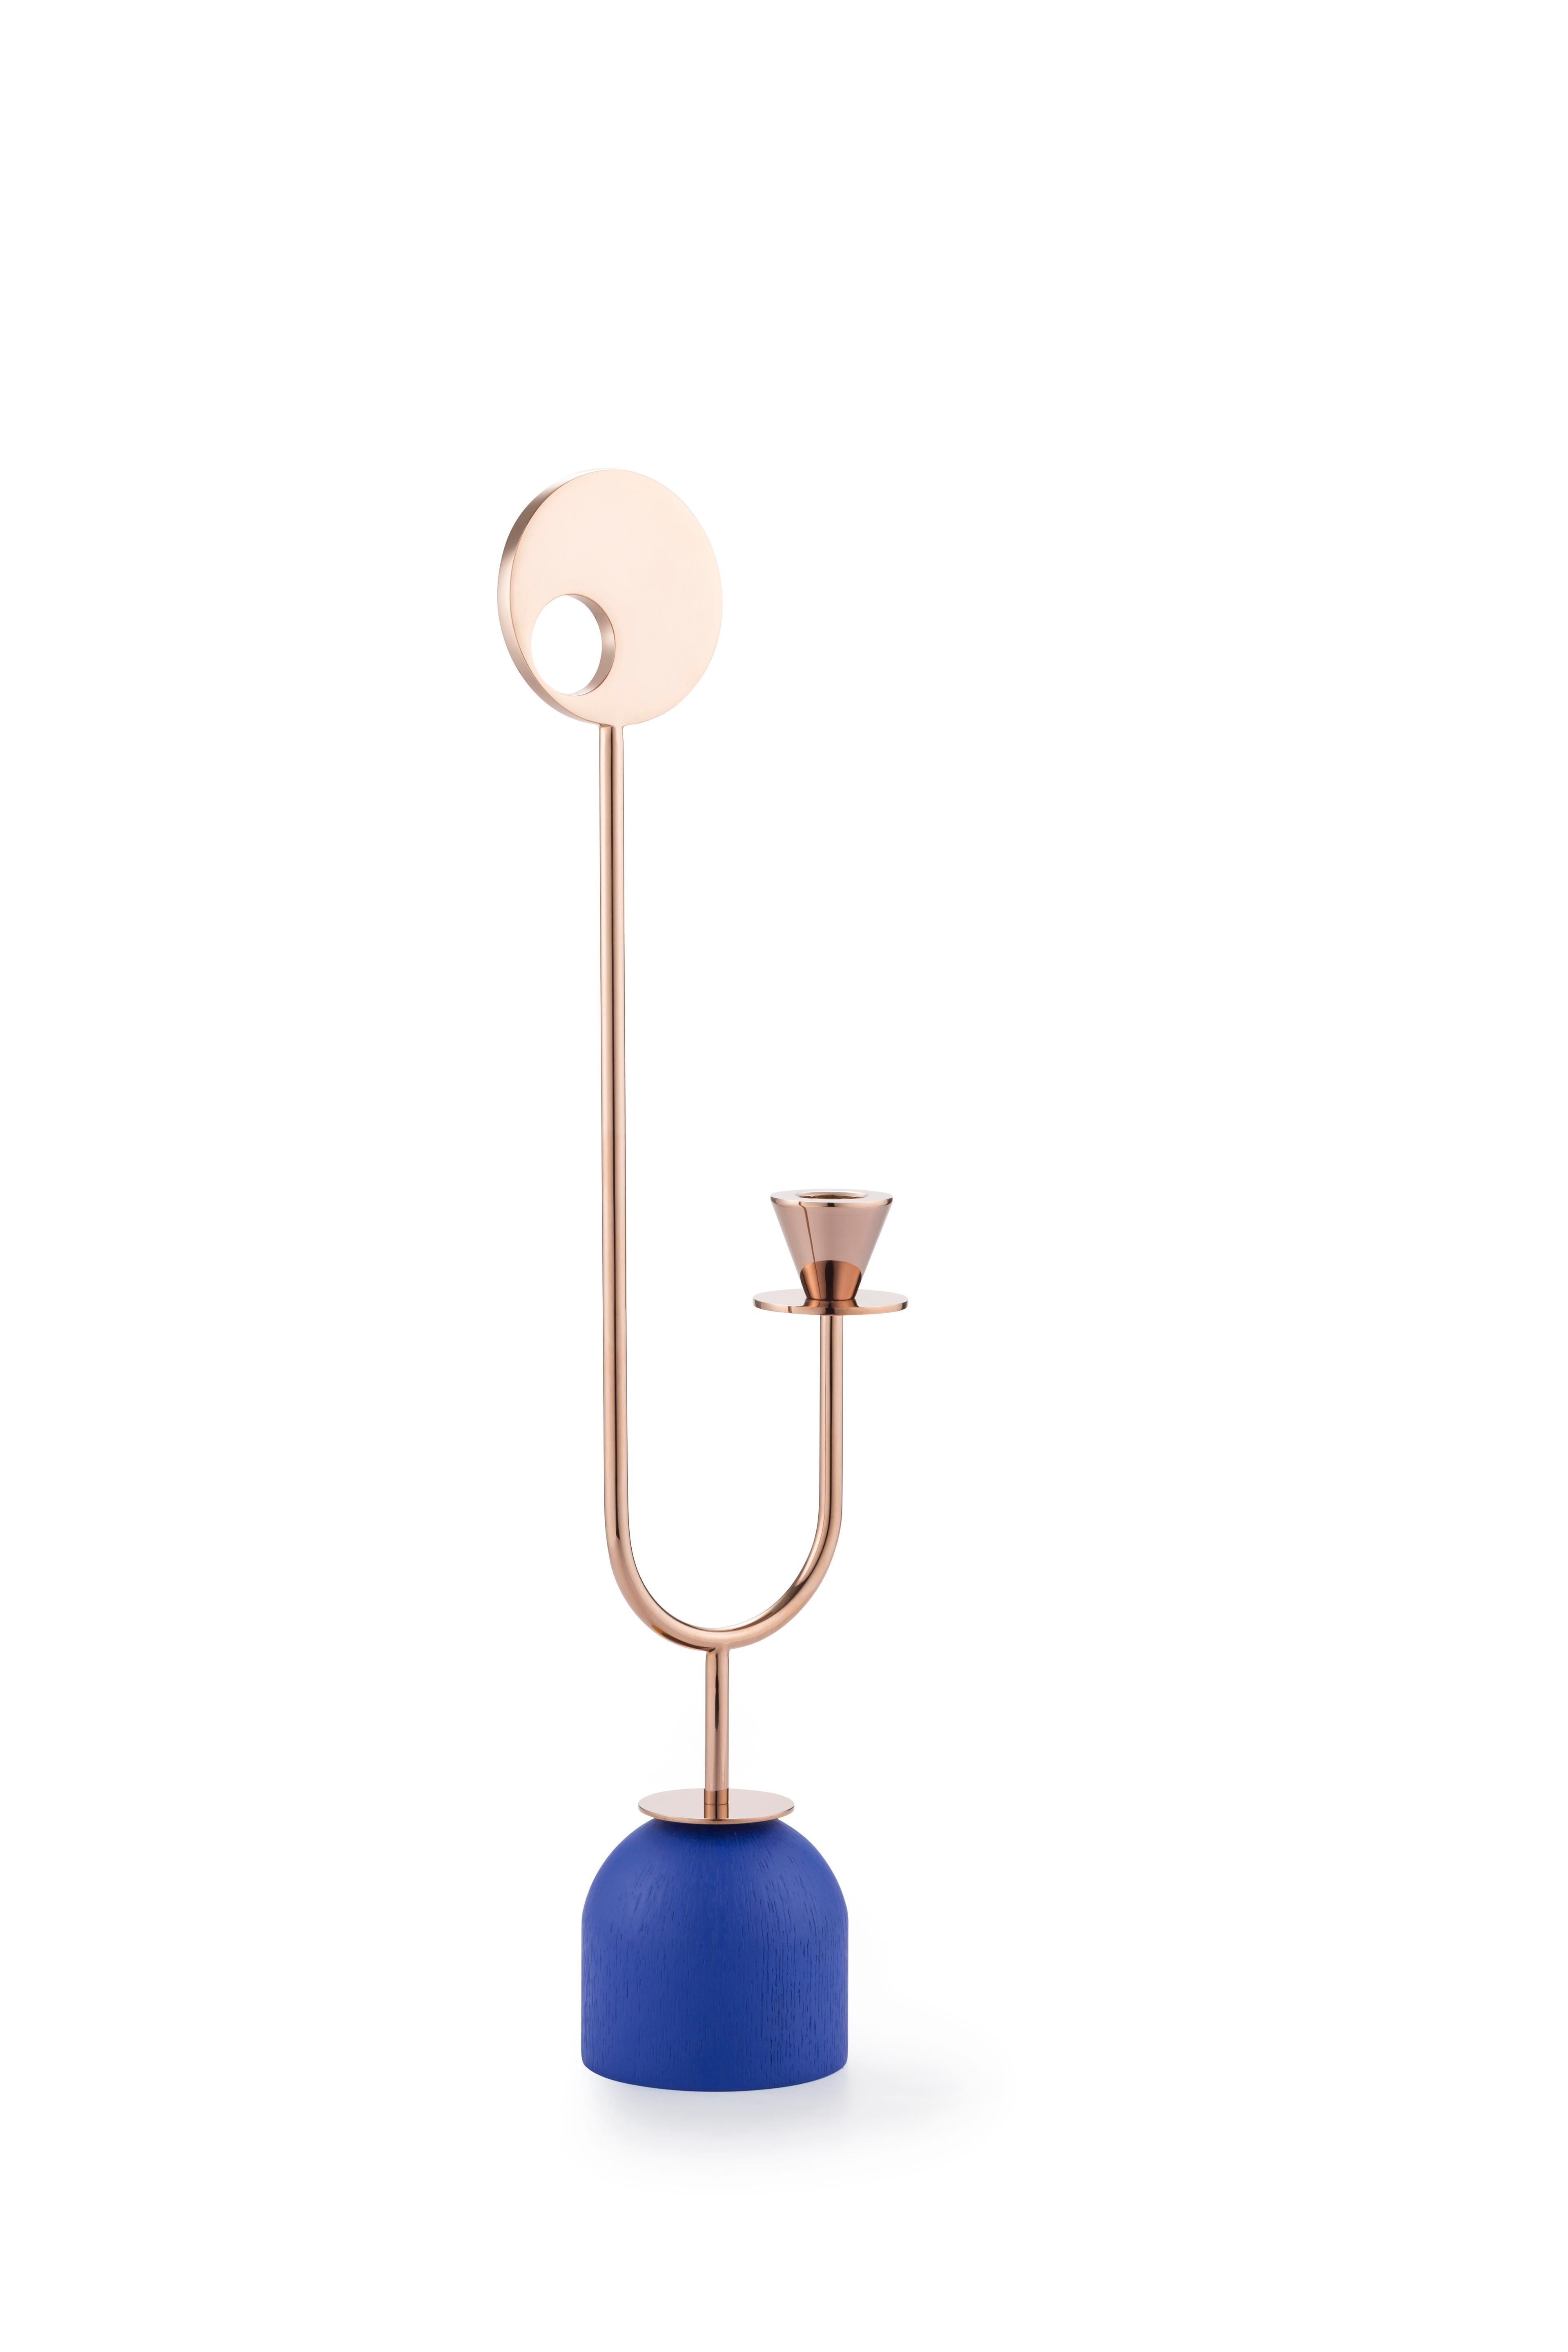 Homage to Memphis Movement, candleholder
Measures: D 8.5 x W 15 x H 50 cm
Plated metal coated with glossy pink copper finish
Base in ash veneer painted in matte dusty pink, yellow or blue

Paris-Memphis capsule collection draws its inspiration